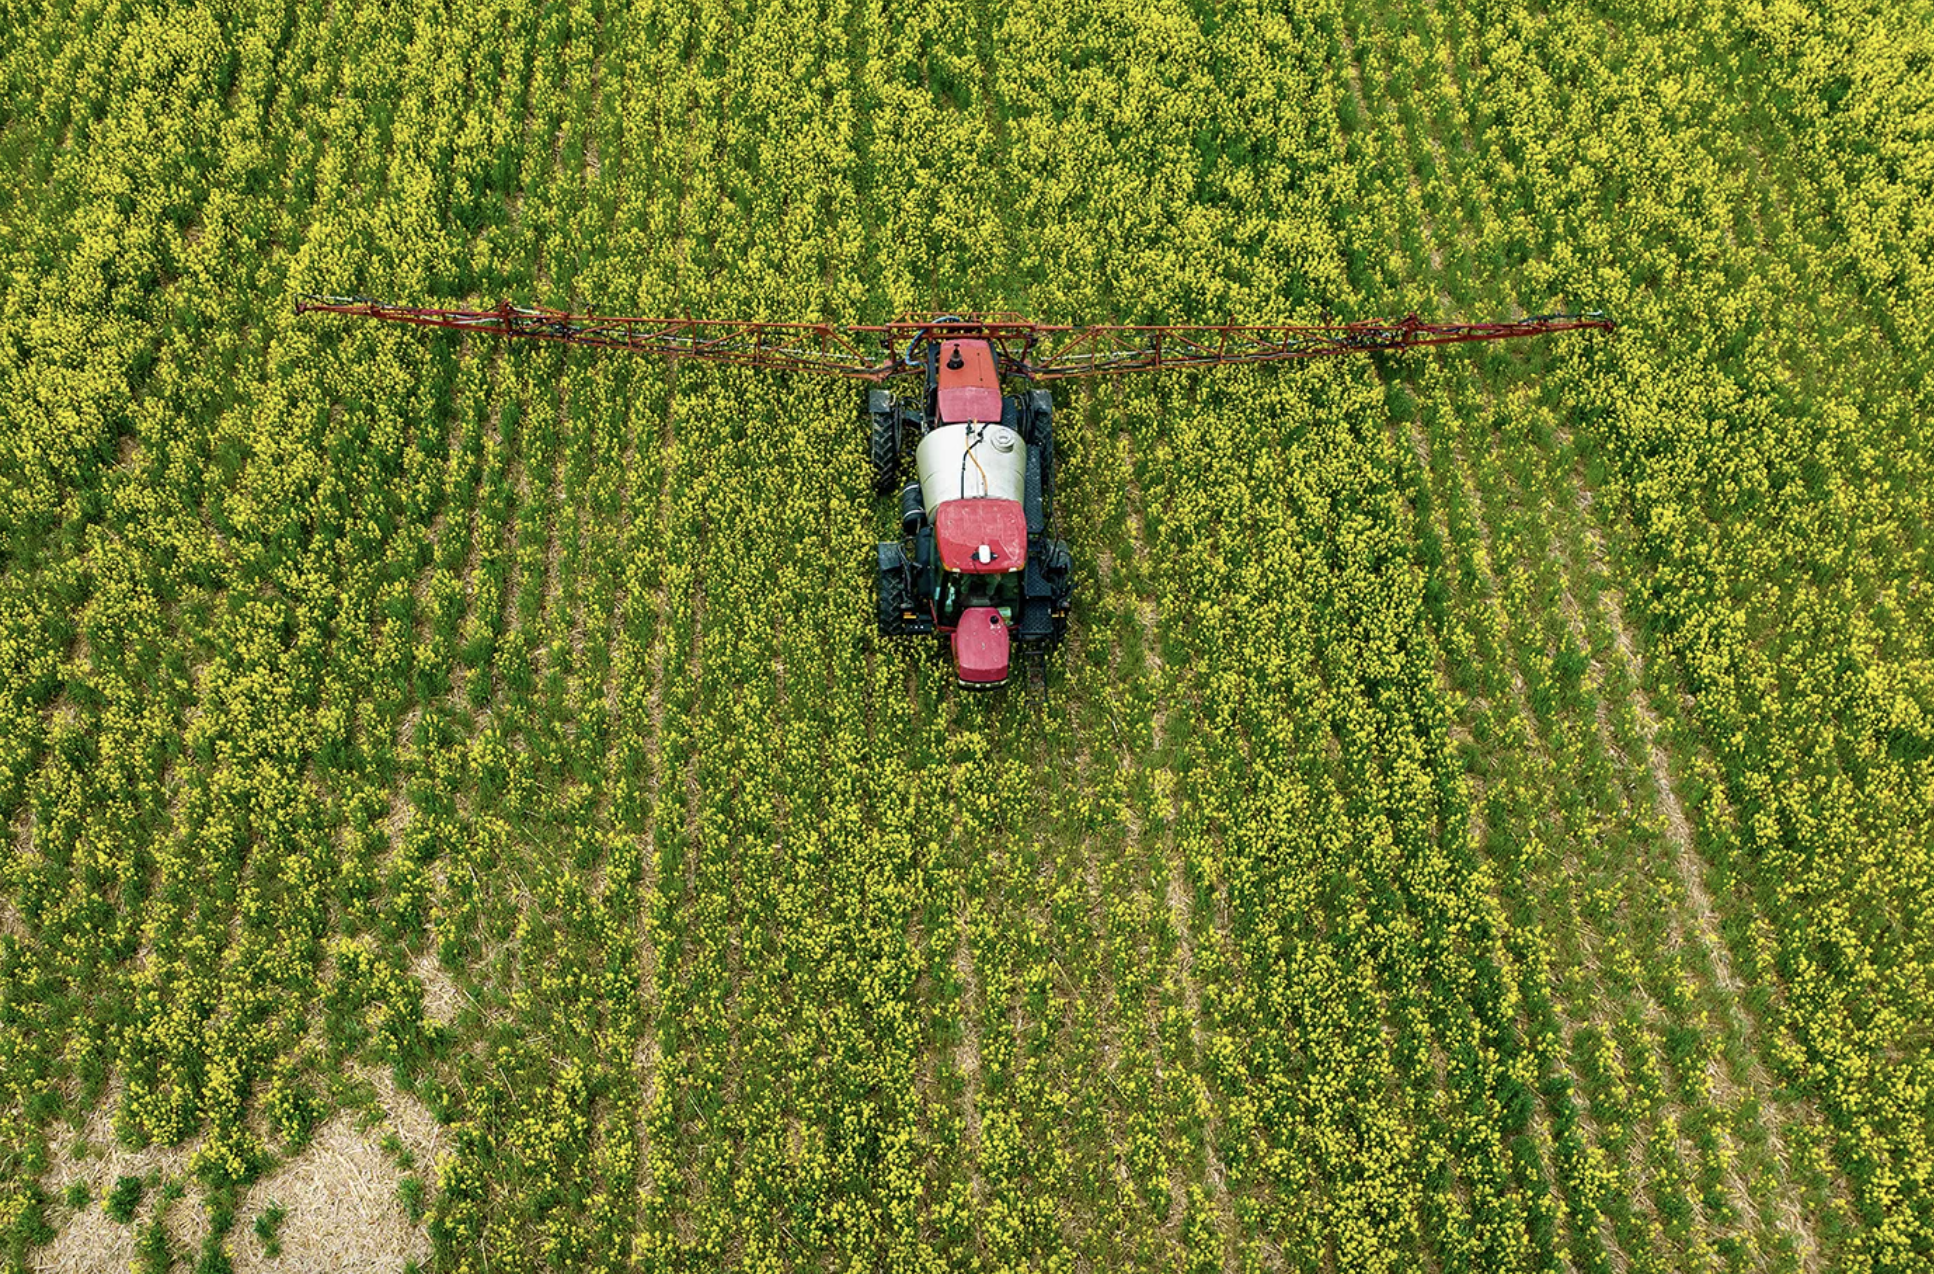 A farmer spreads pesticide on a field in Centreville, Maryland. Photo by JIM WATSON/AFP via Getty Images